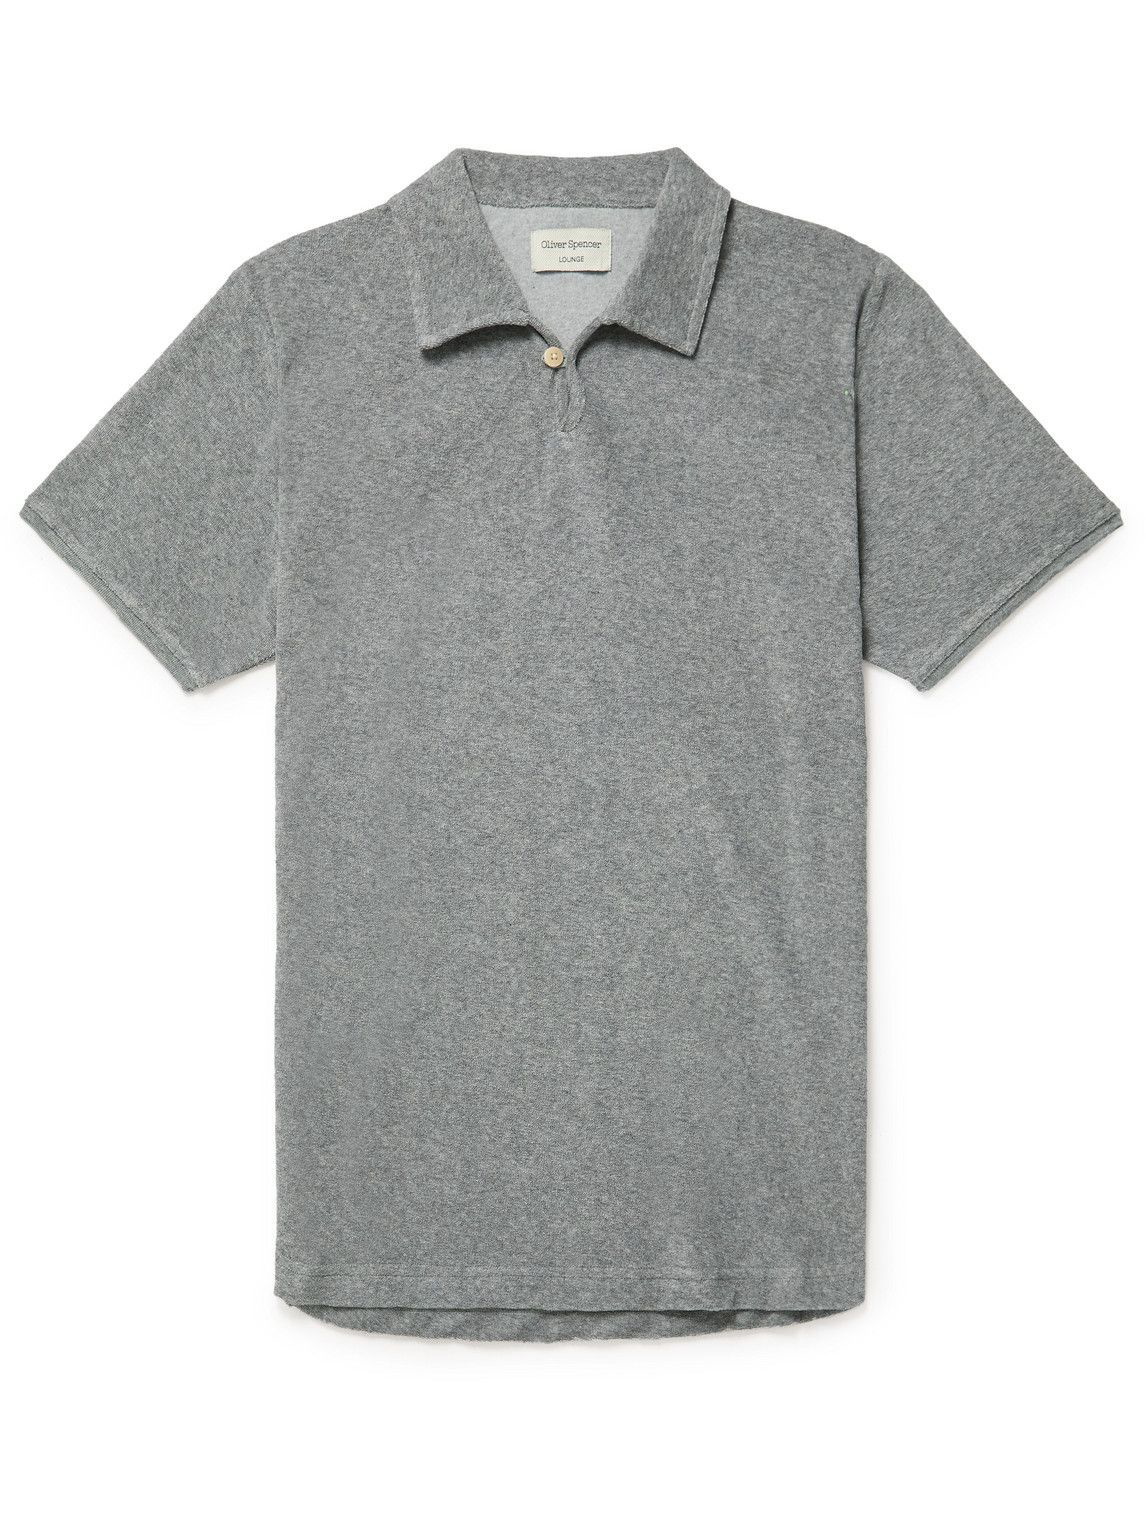 Photo: Oliver Spencer Loungewear - Cotton-Blend Terry Polo Shirt - Gray